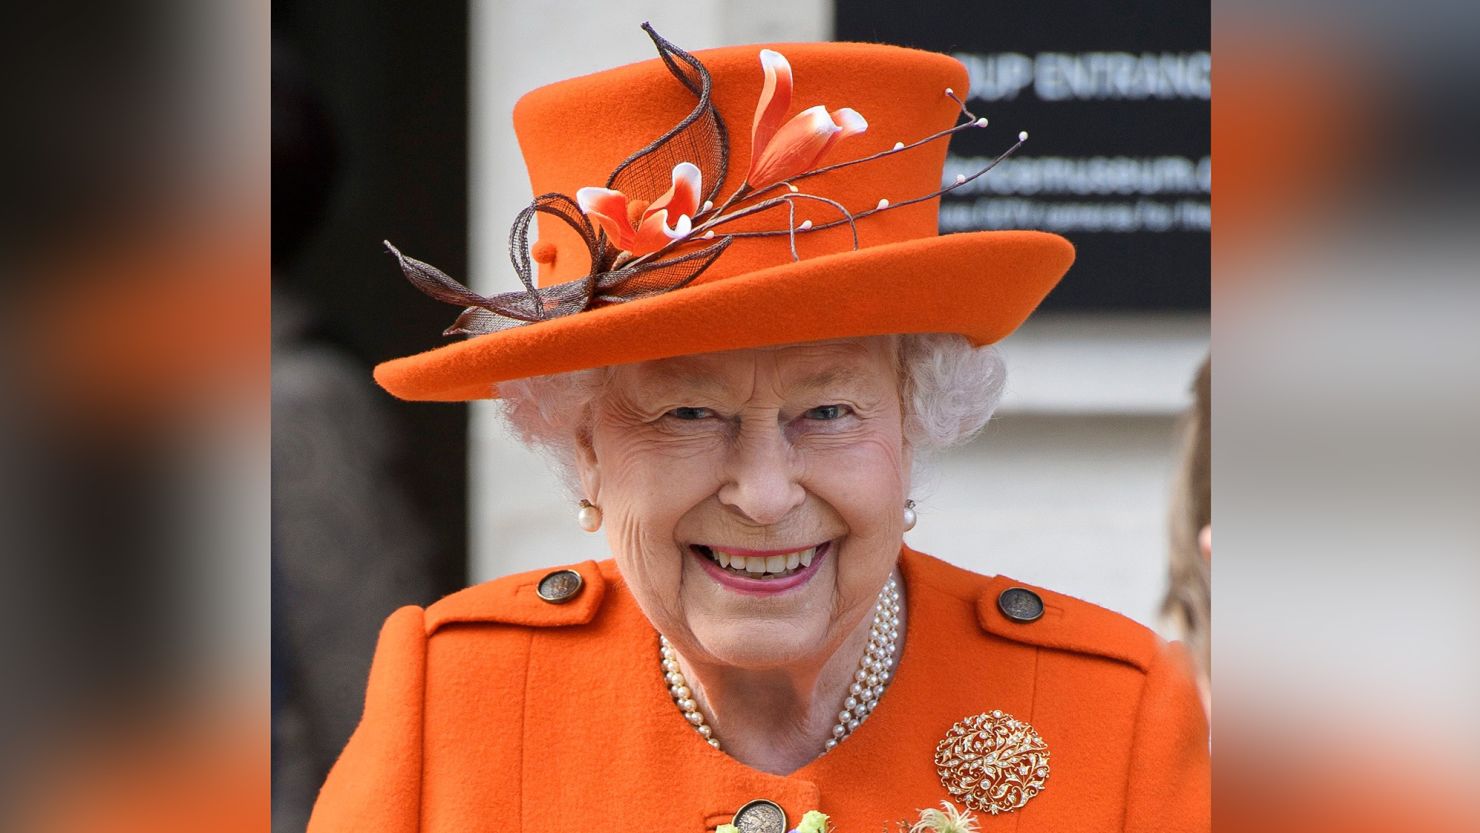 The Queen at the Science Museum in London in 2019.